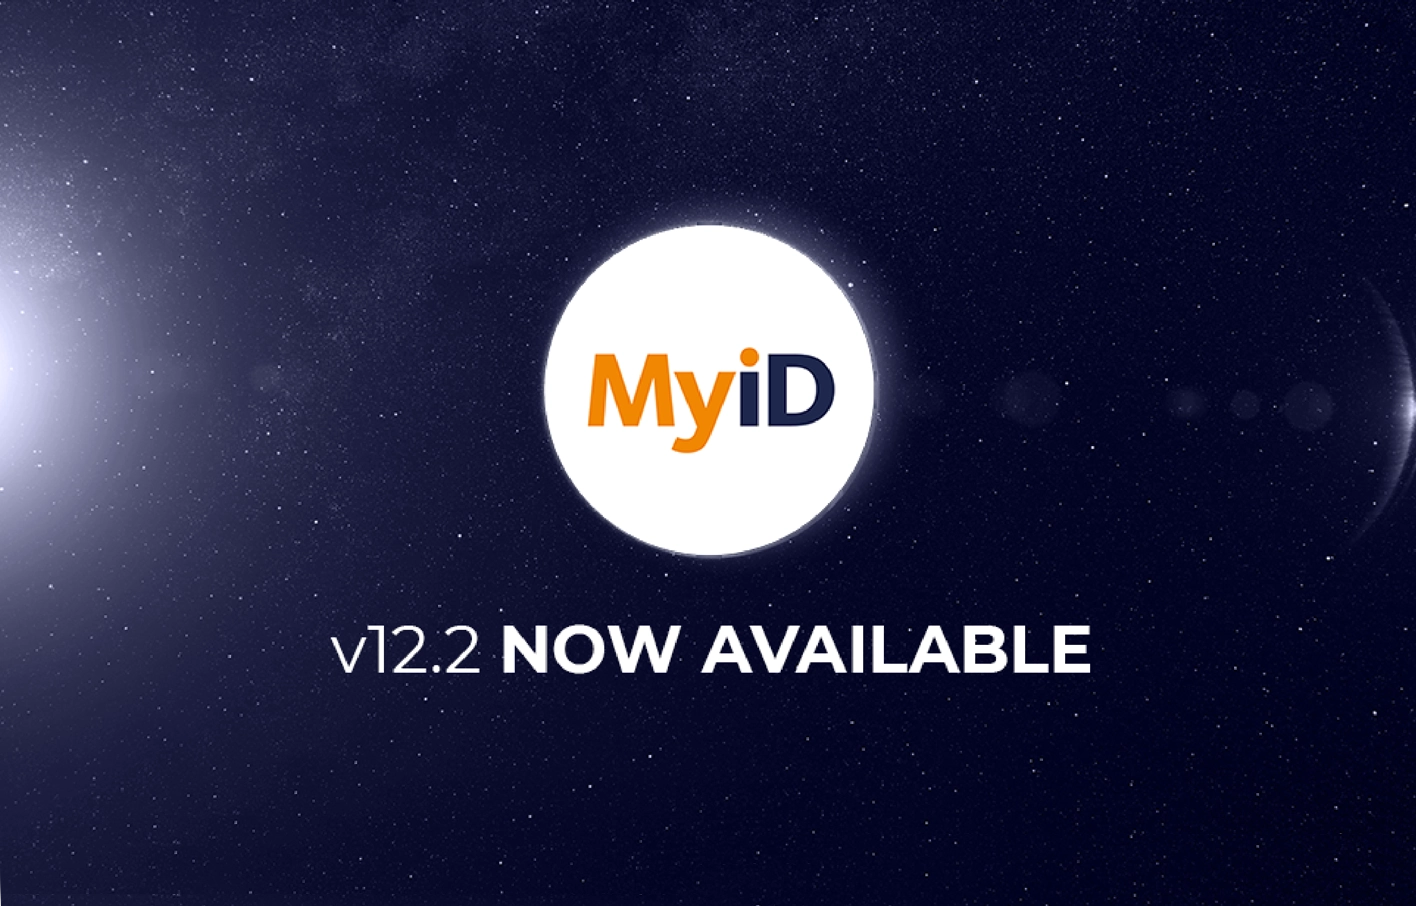 MyID Version 12.2 now available